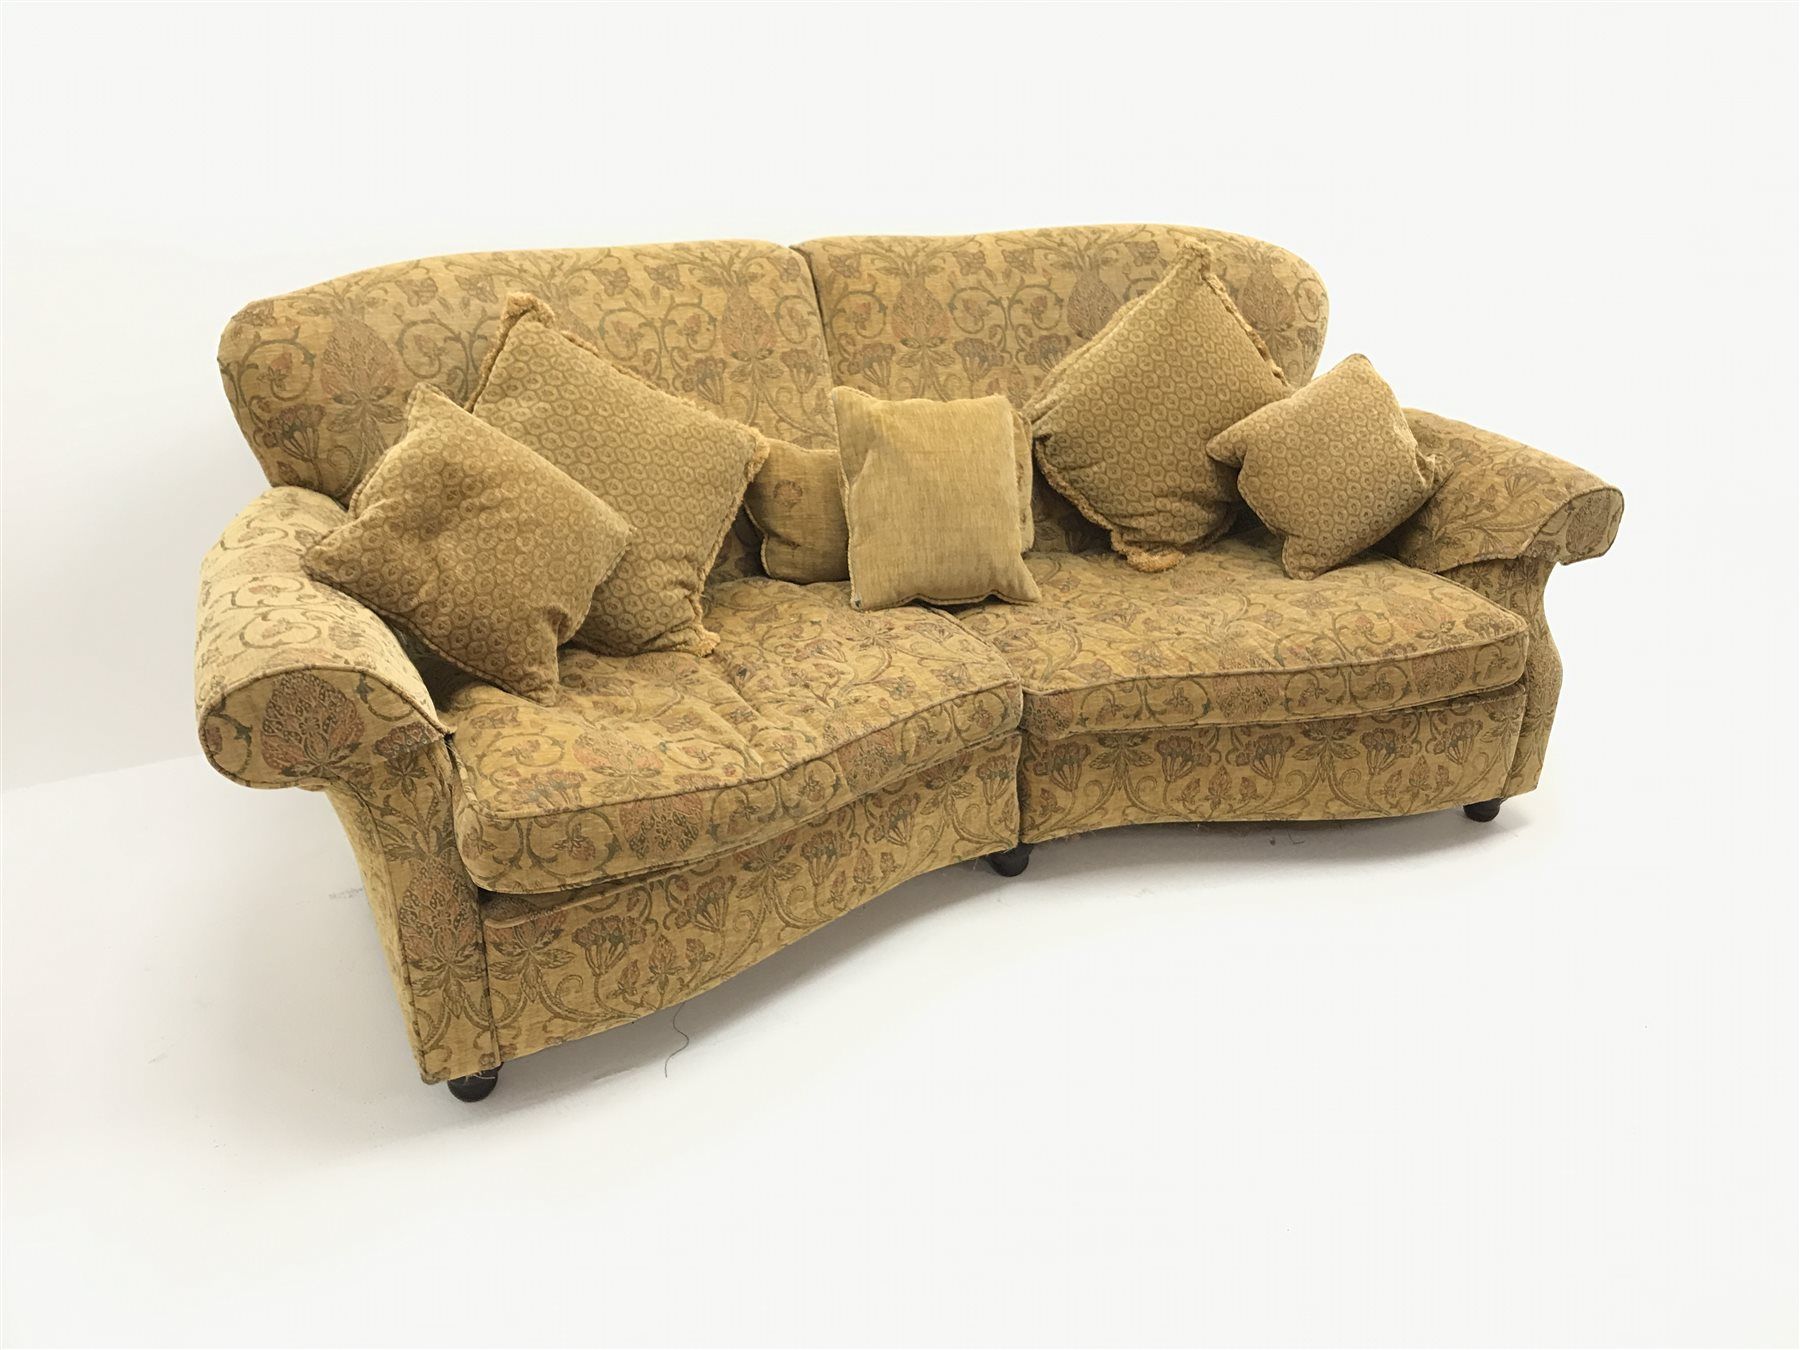 Three Seat Curved Traditional Sofa, Scrolled Arms, Upholstered In A With Regard To Traditional 3 Seater Sofas (View 7 of 20)